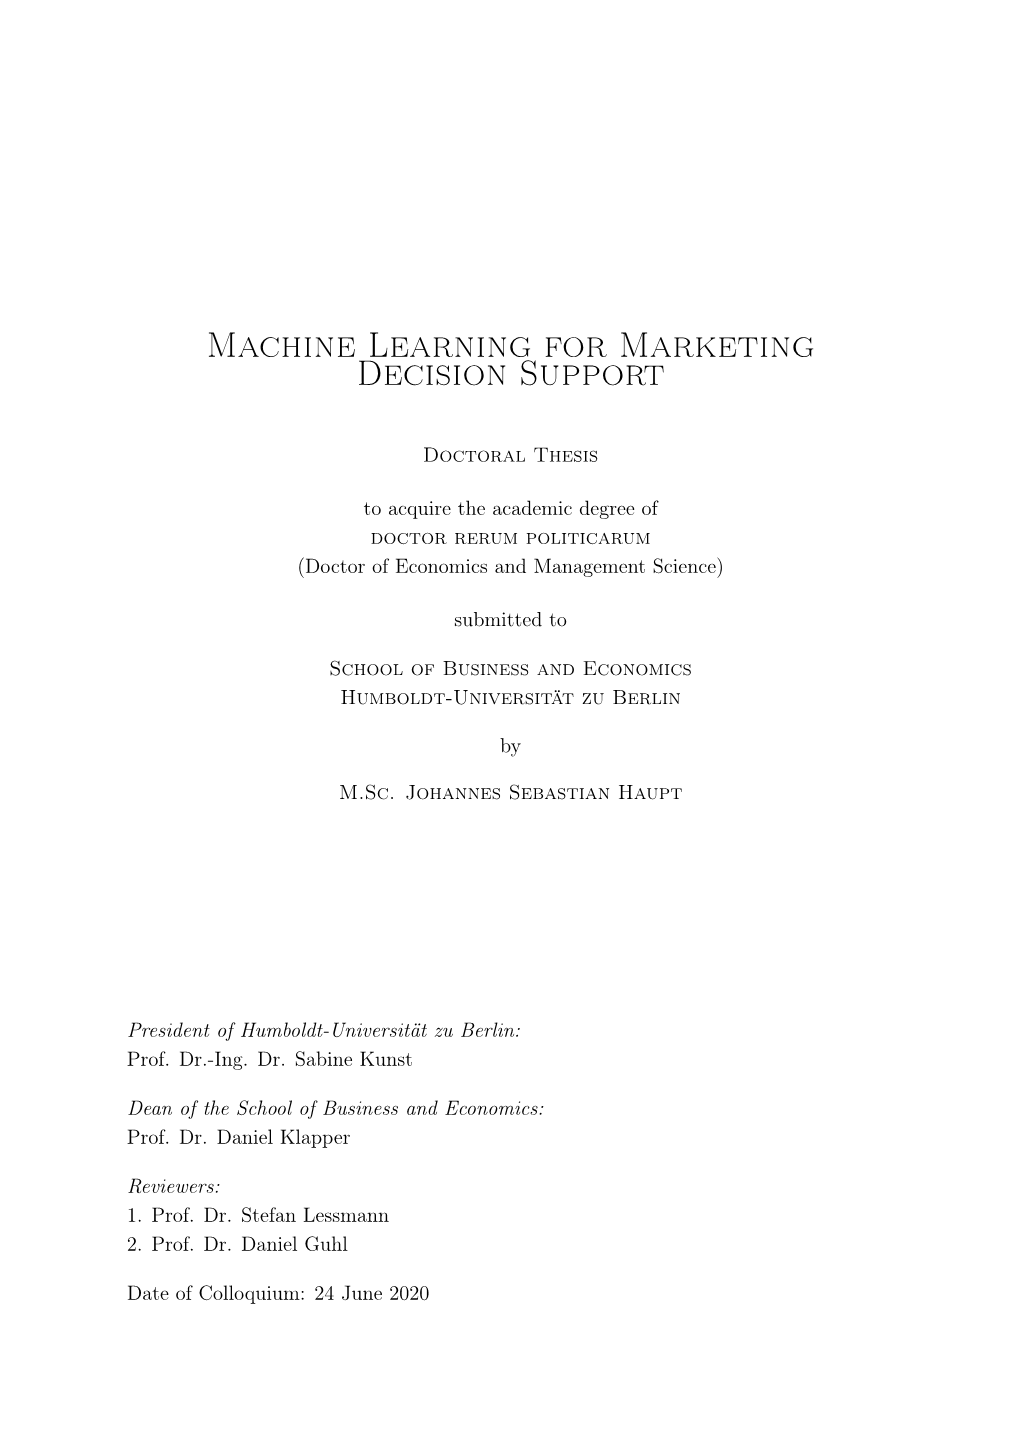 Machine Learning for Marketing Decision Support